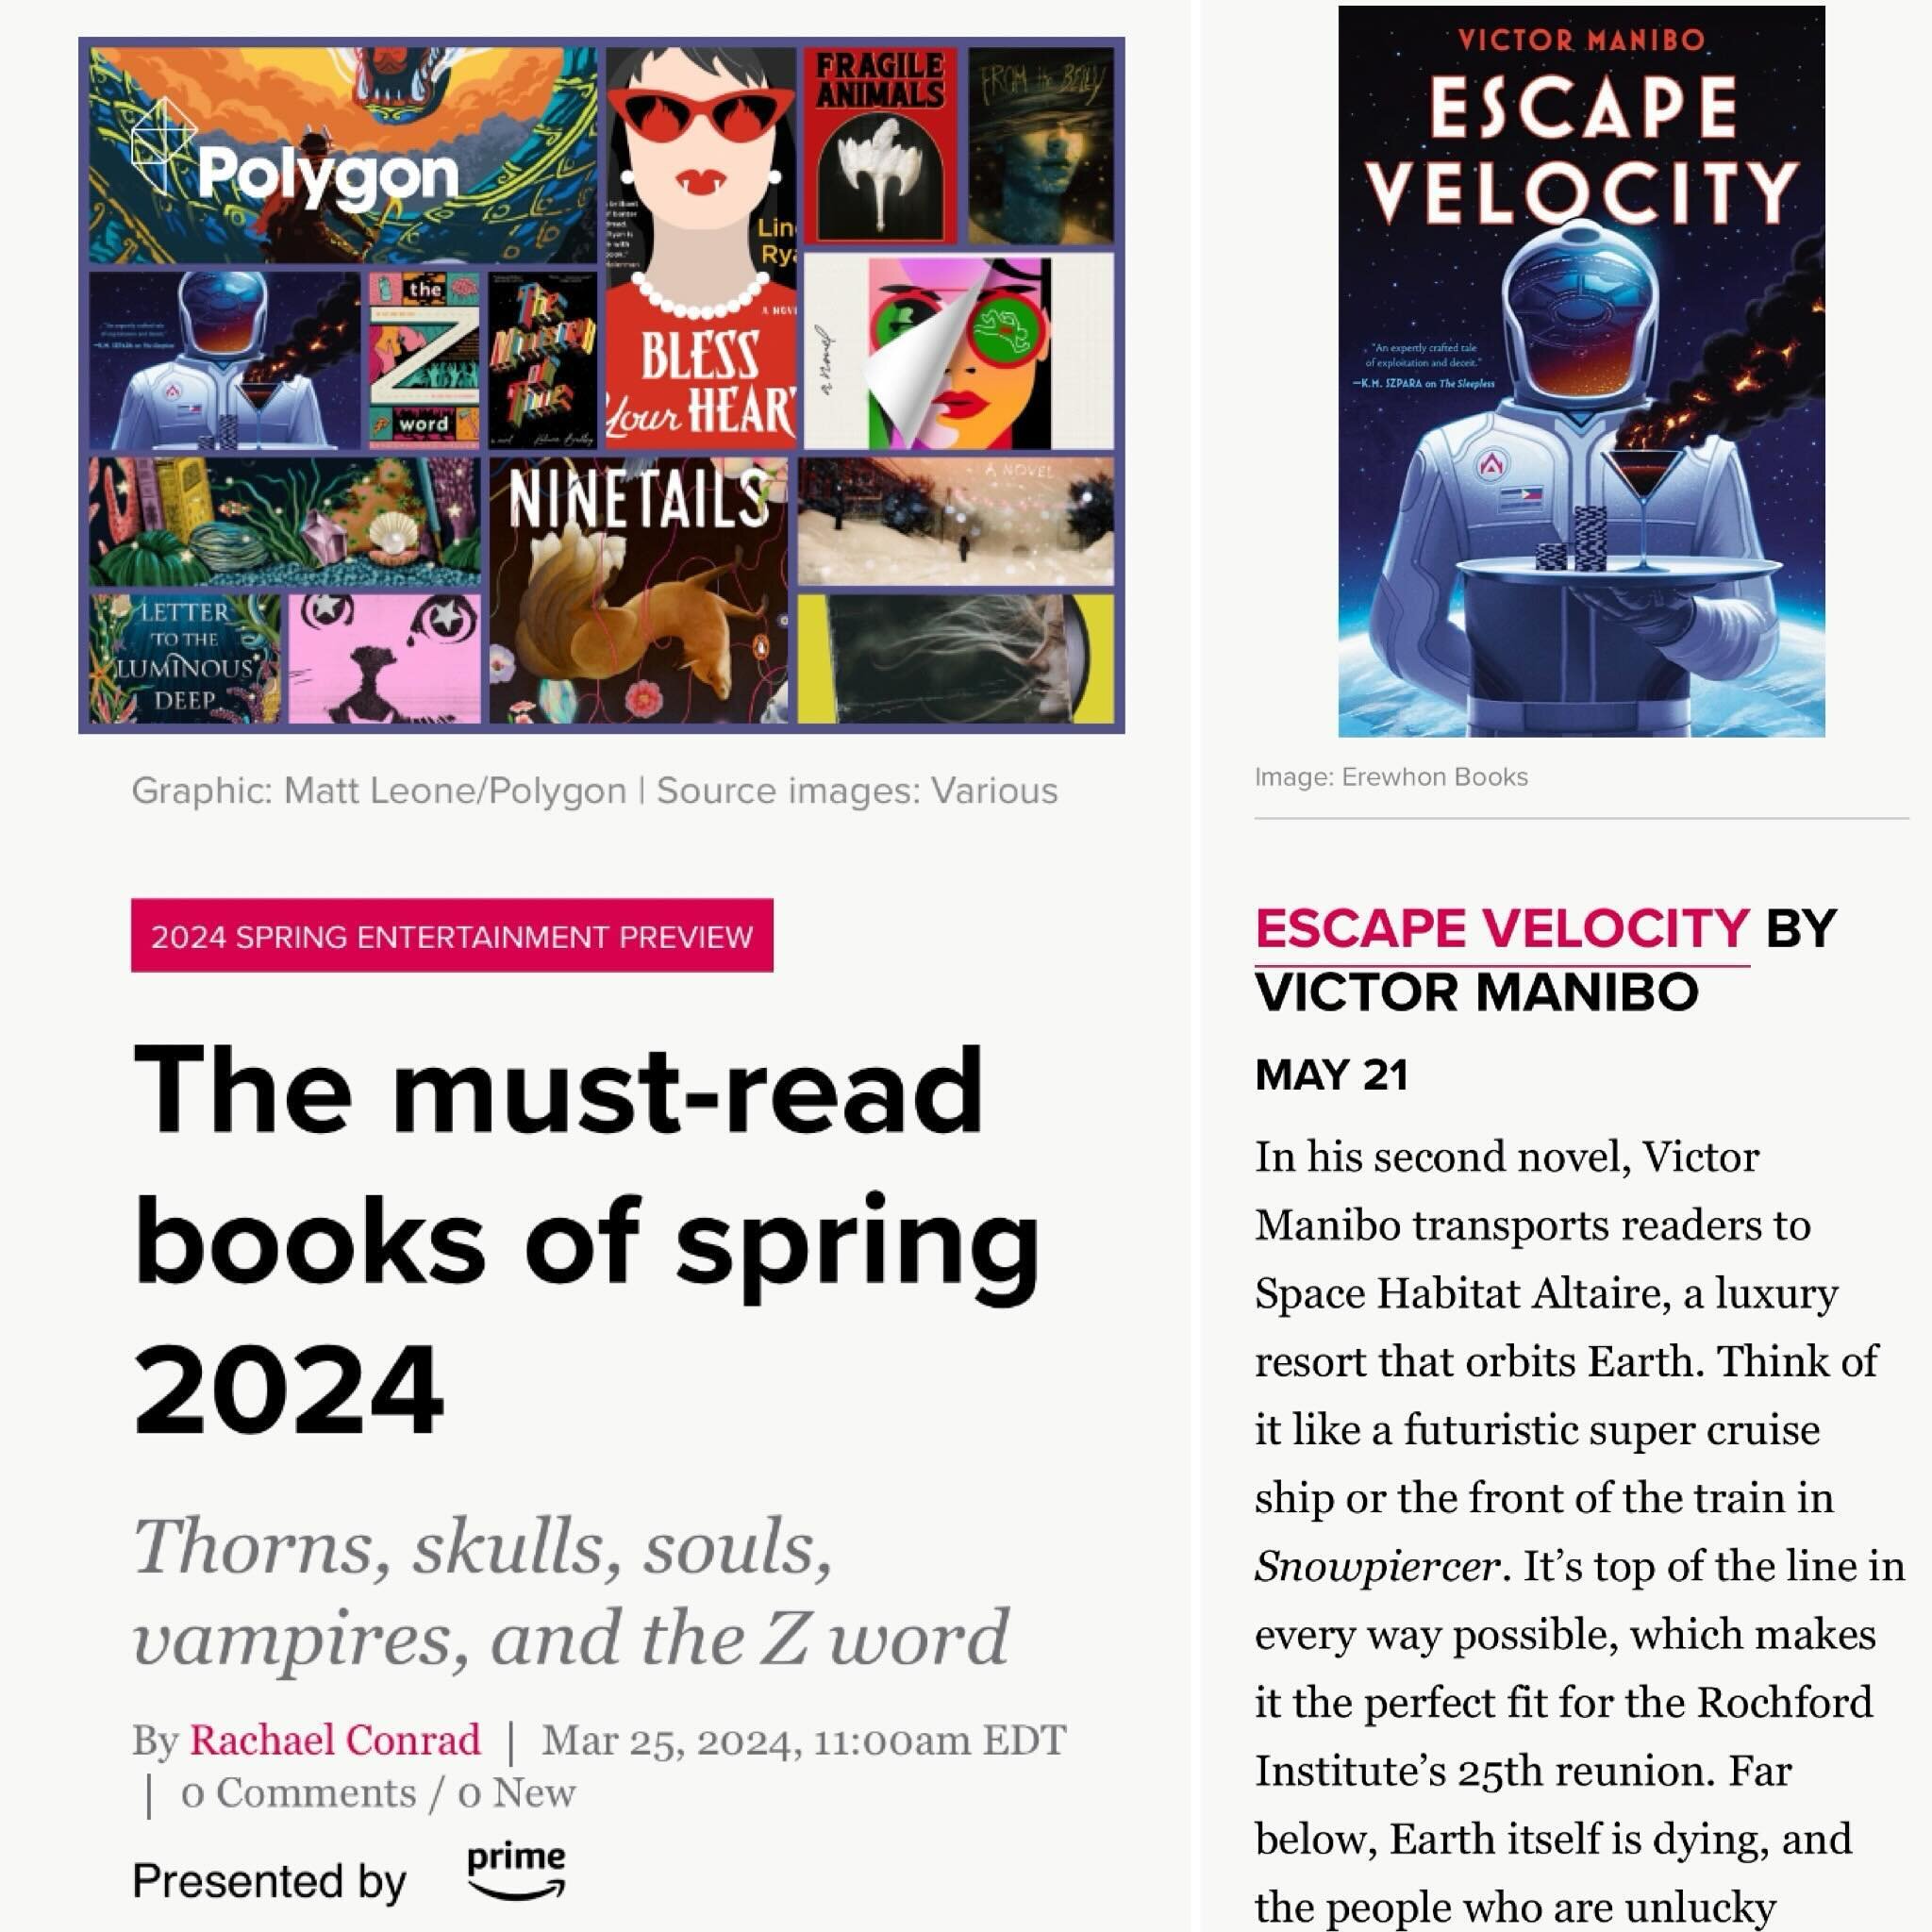 Thank you, @polygondotcom and @rachaelconrad for including ESCAPE VELOCITY in this spring preview!